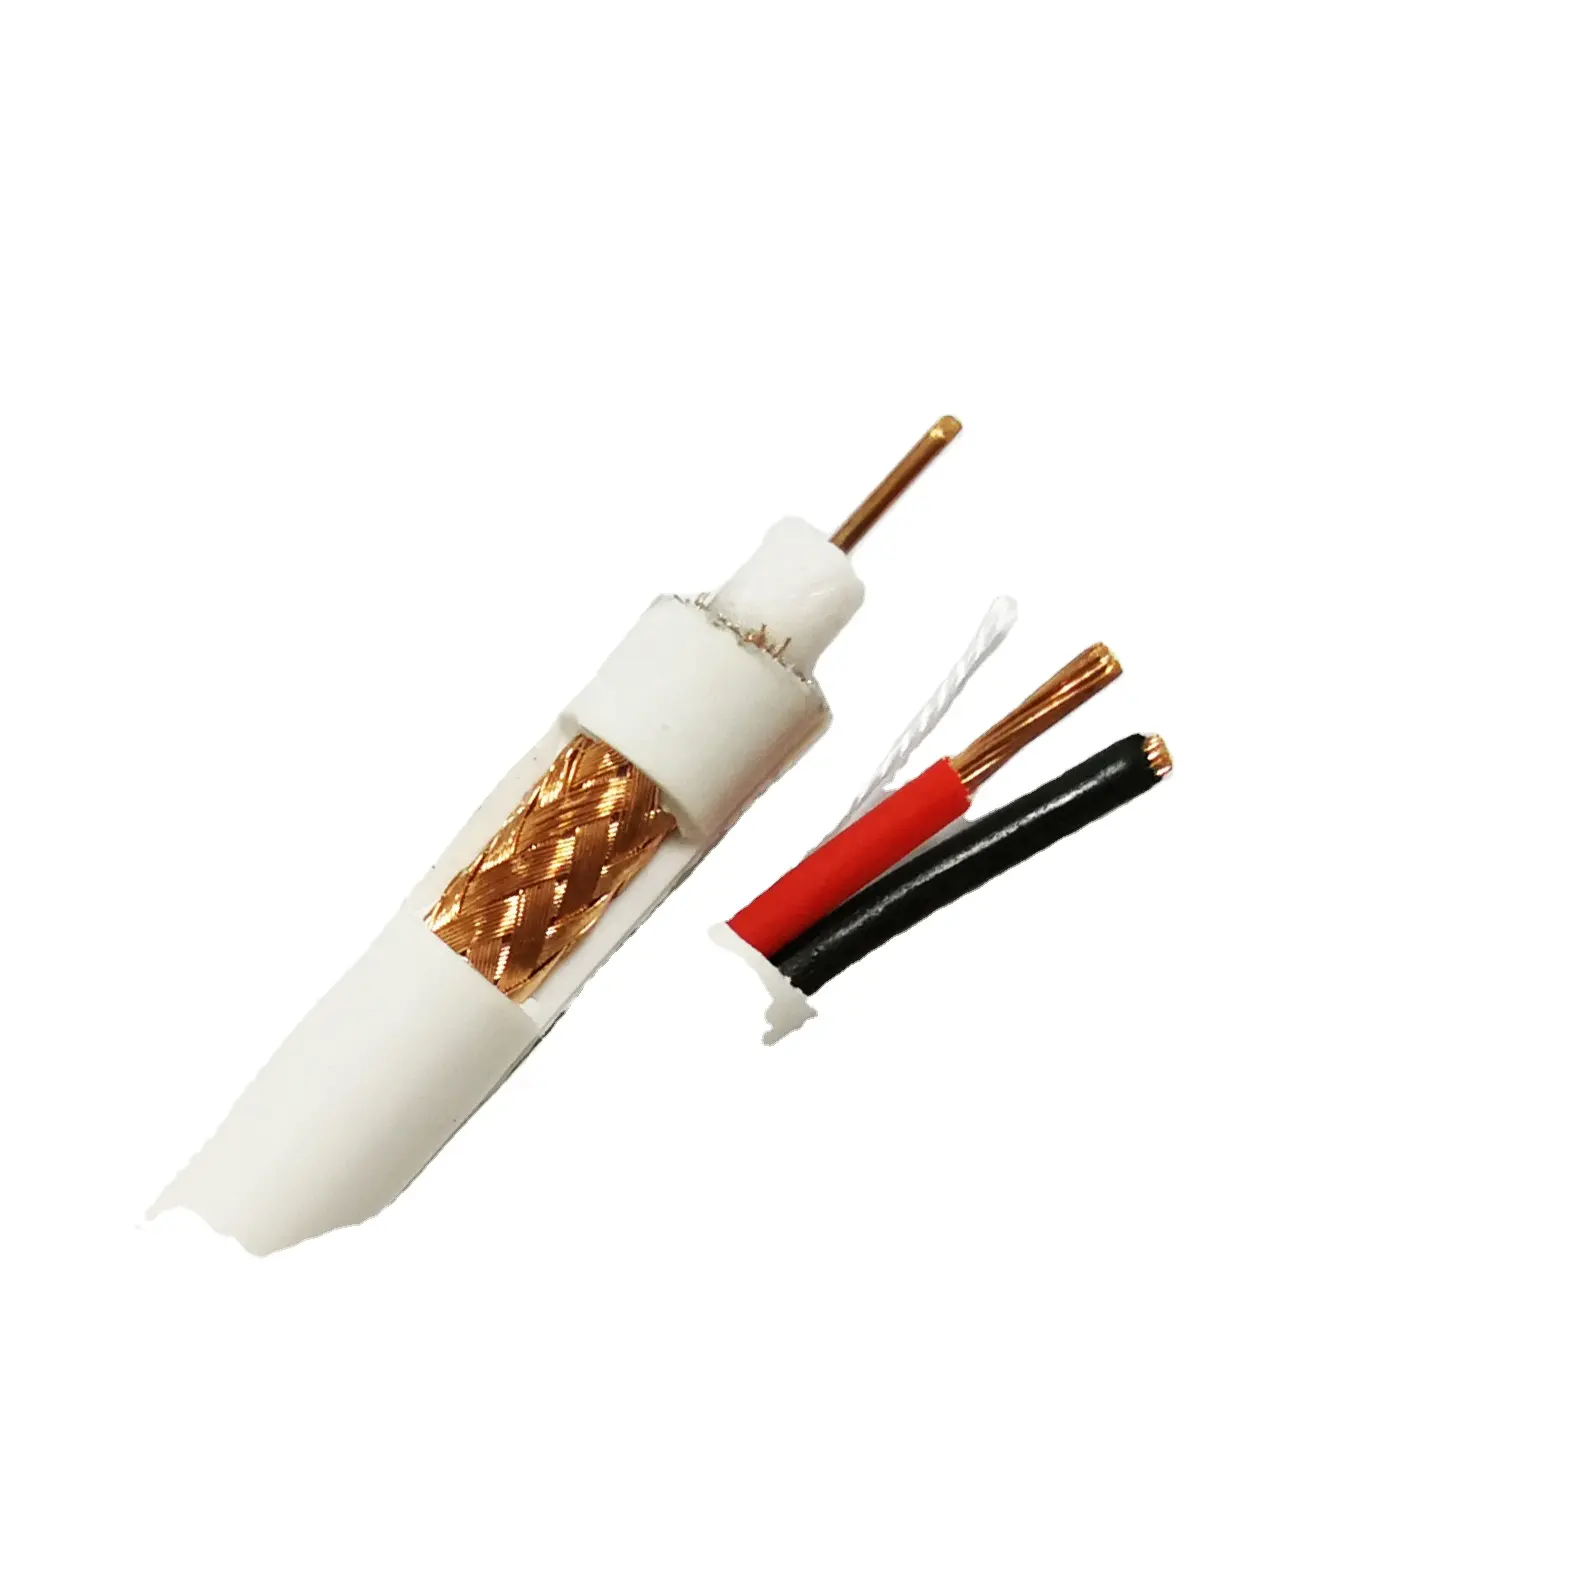 High Quality Hybrid Cable RG59+2C 20AWG + 18AWG power cable PVC Jacket Composite Coaxial Cable for cctv camera security system